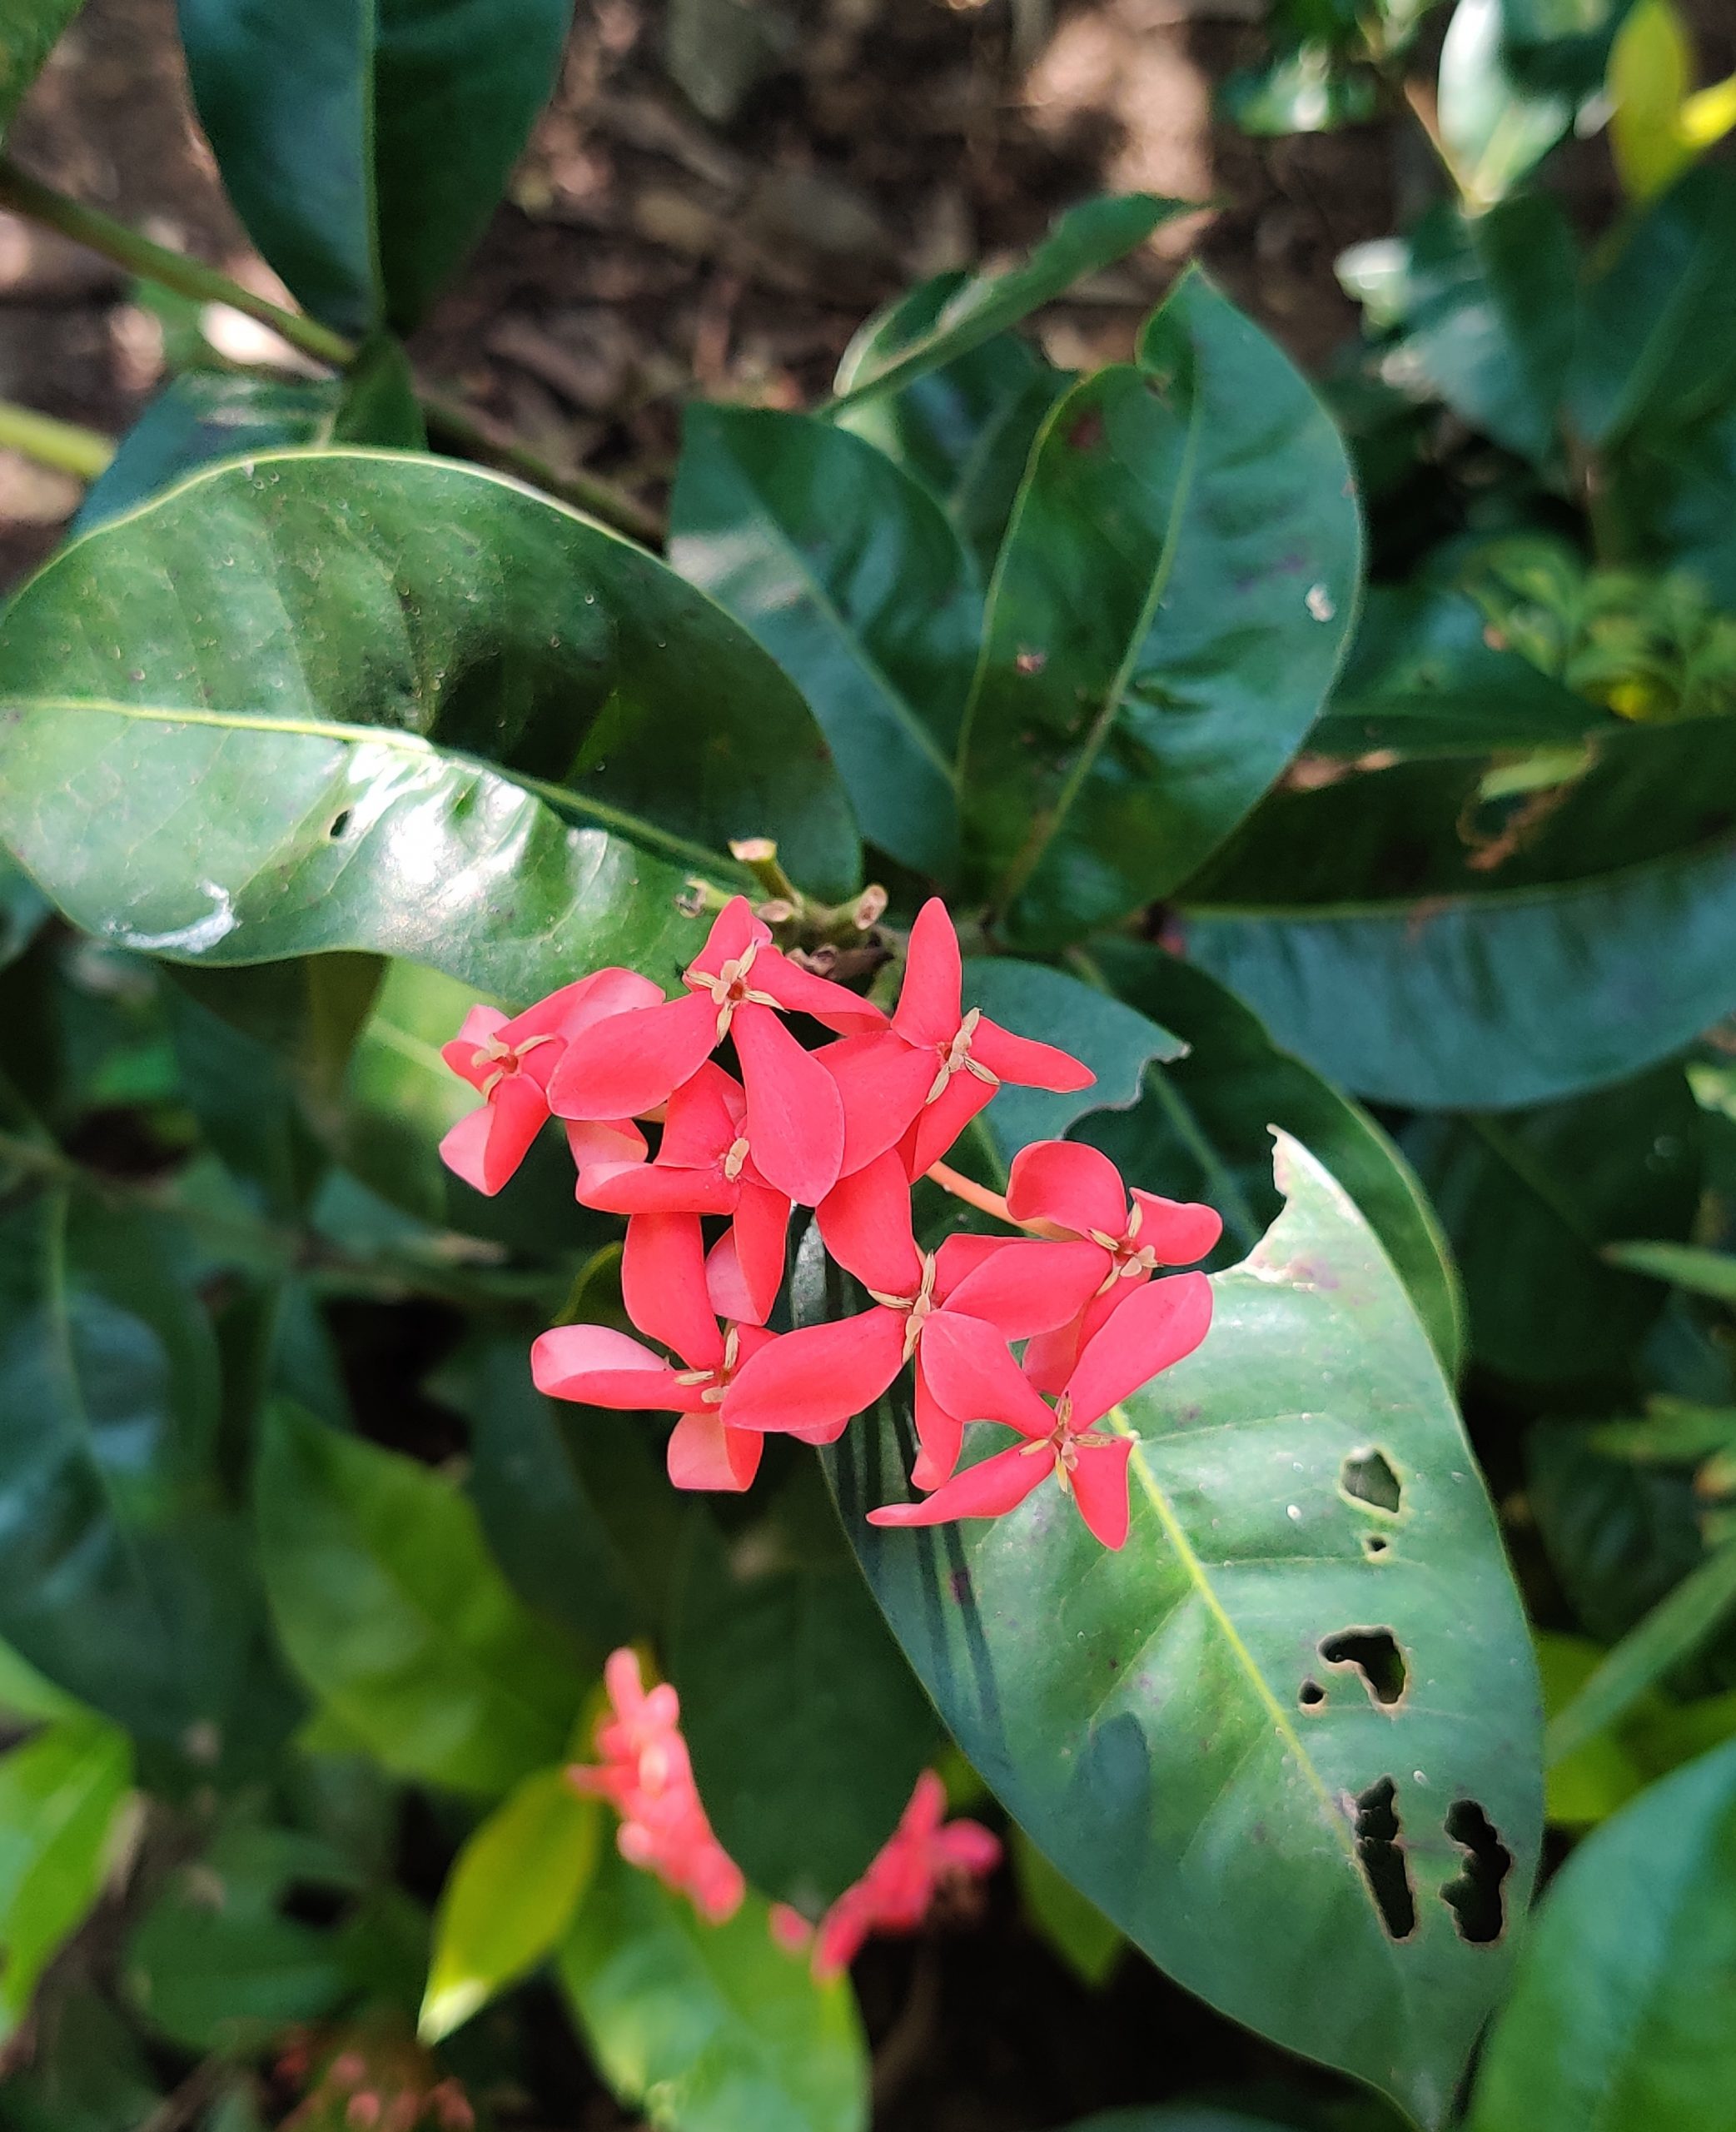 Red flowers on a plant